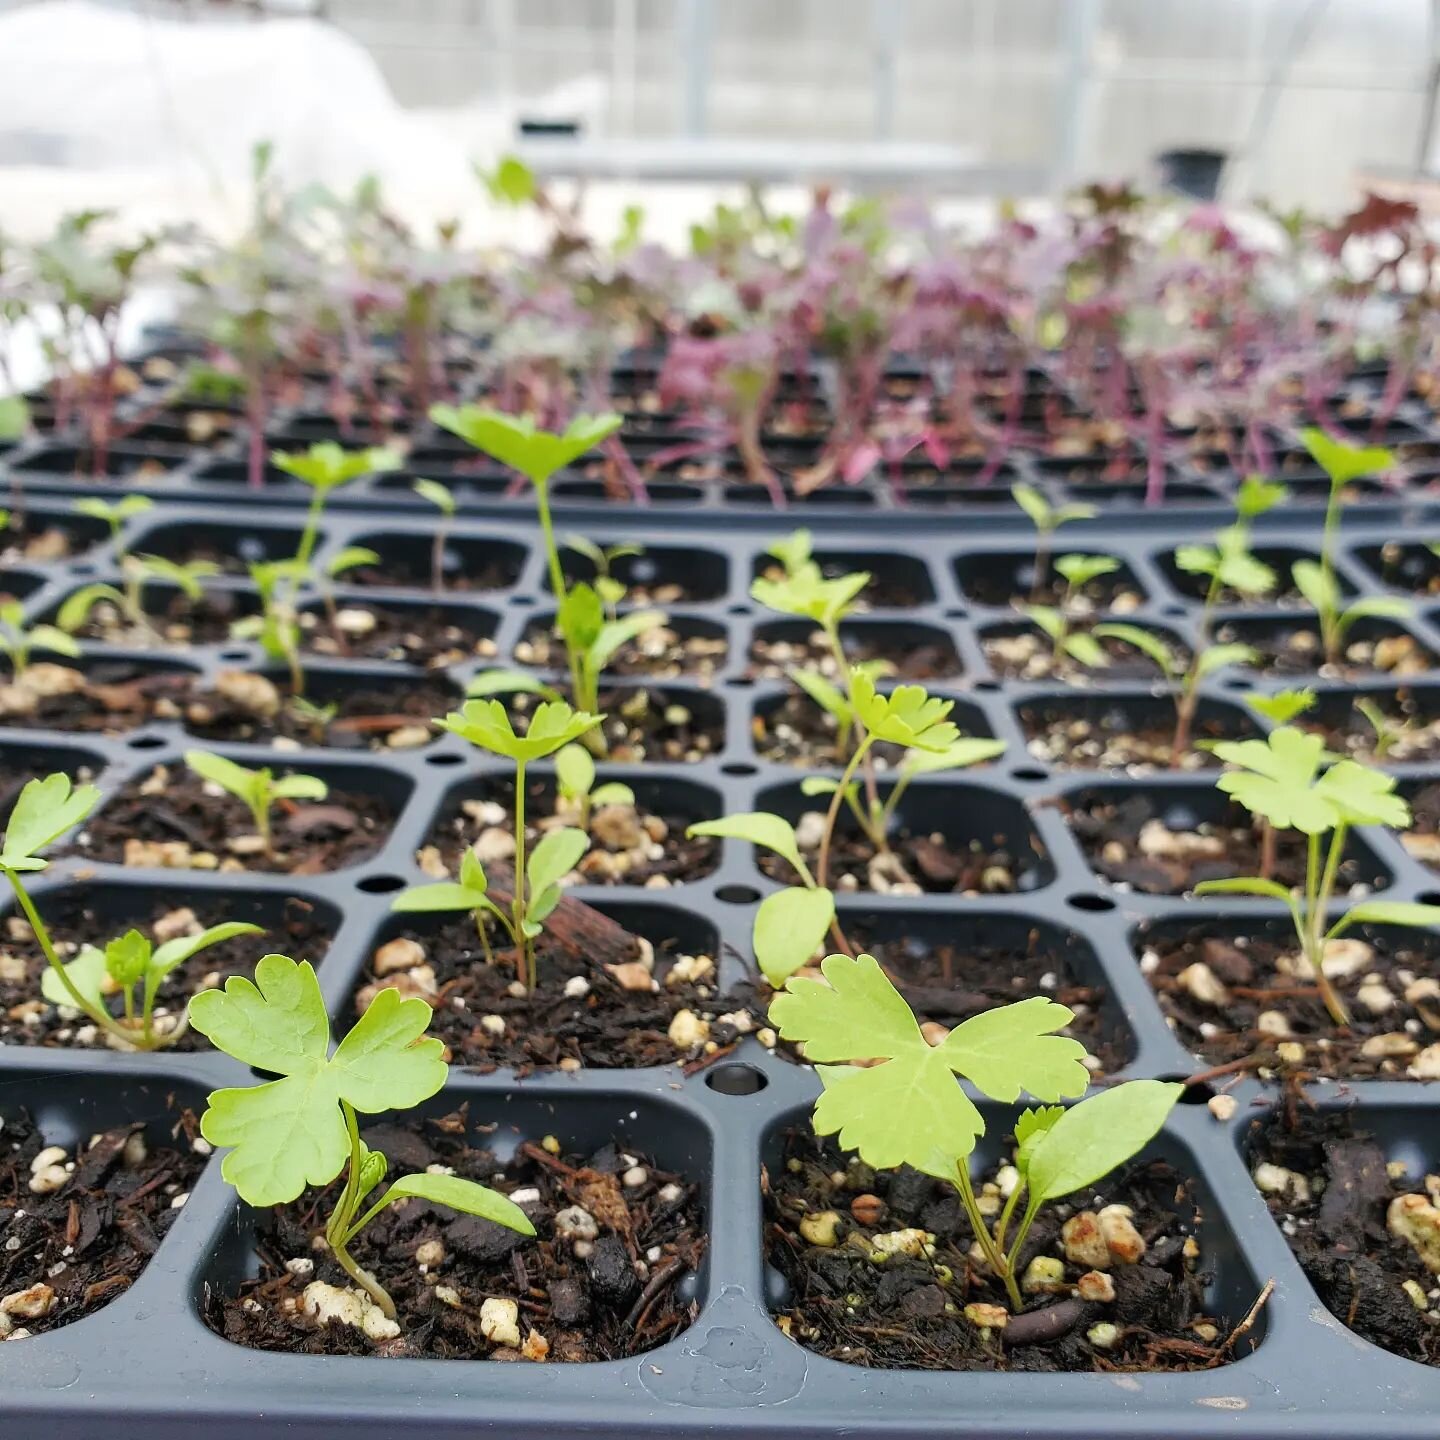 Our very first farm seedlings are settled into the greenhouse and will be ready for planting in just a few weeks and CSA signups open April 1st. It's happening!

#farmer #queerfarmers #woodinville #localfood #csa #seattlefood #seattlecsa